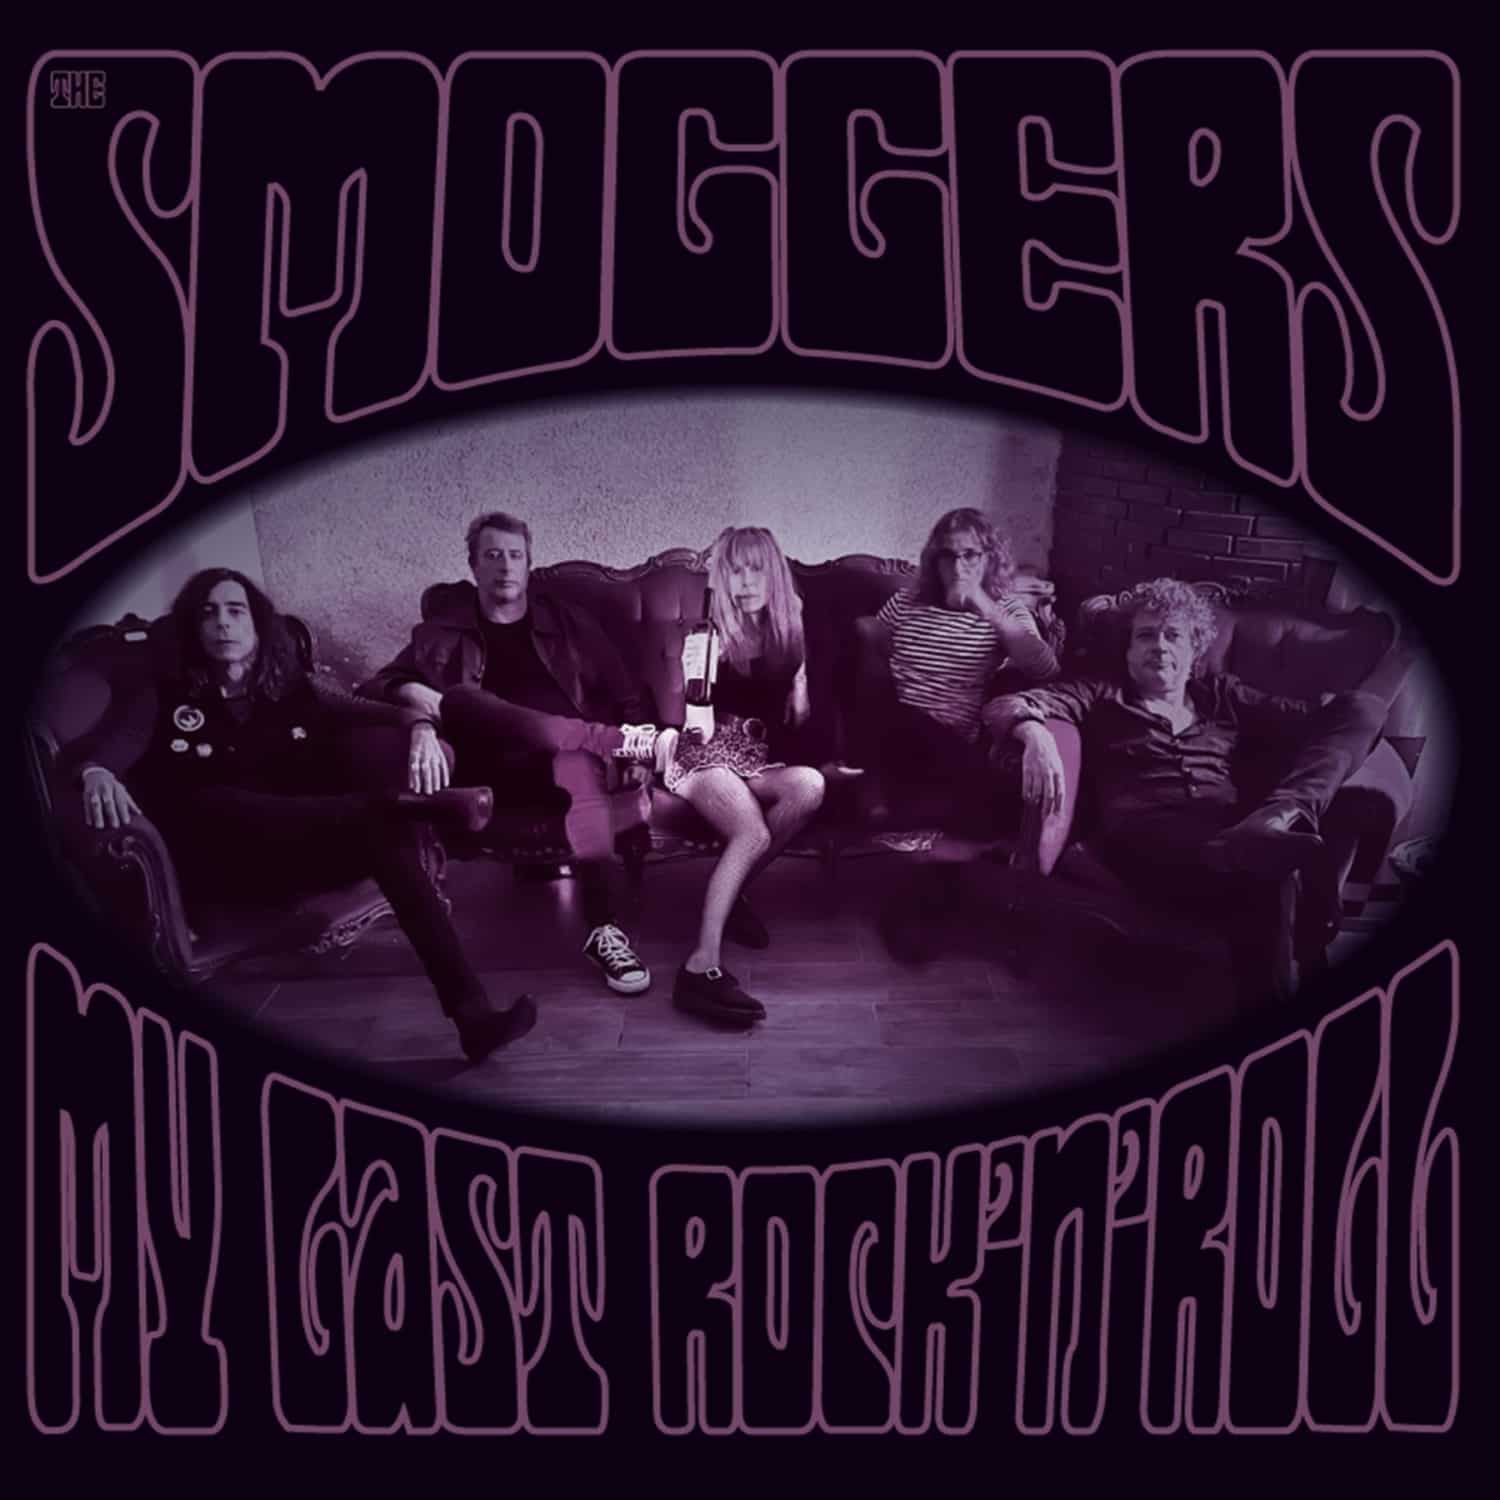 The Smoggers - MY LAST ROCK N ROLL 